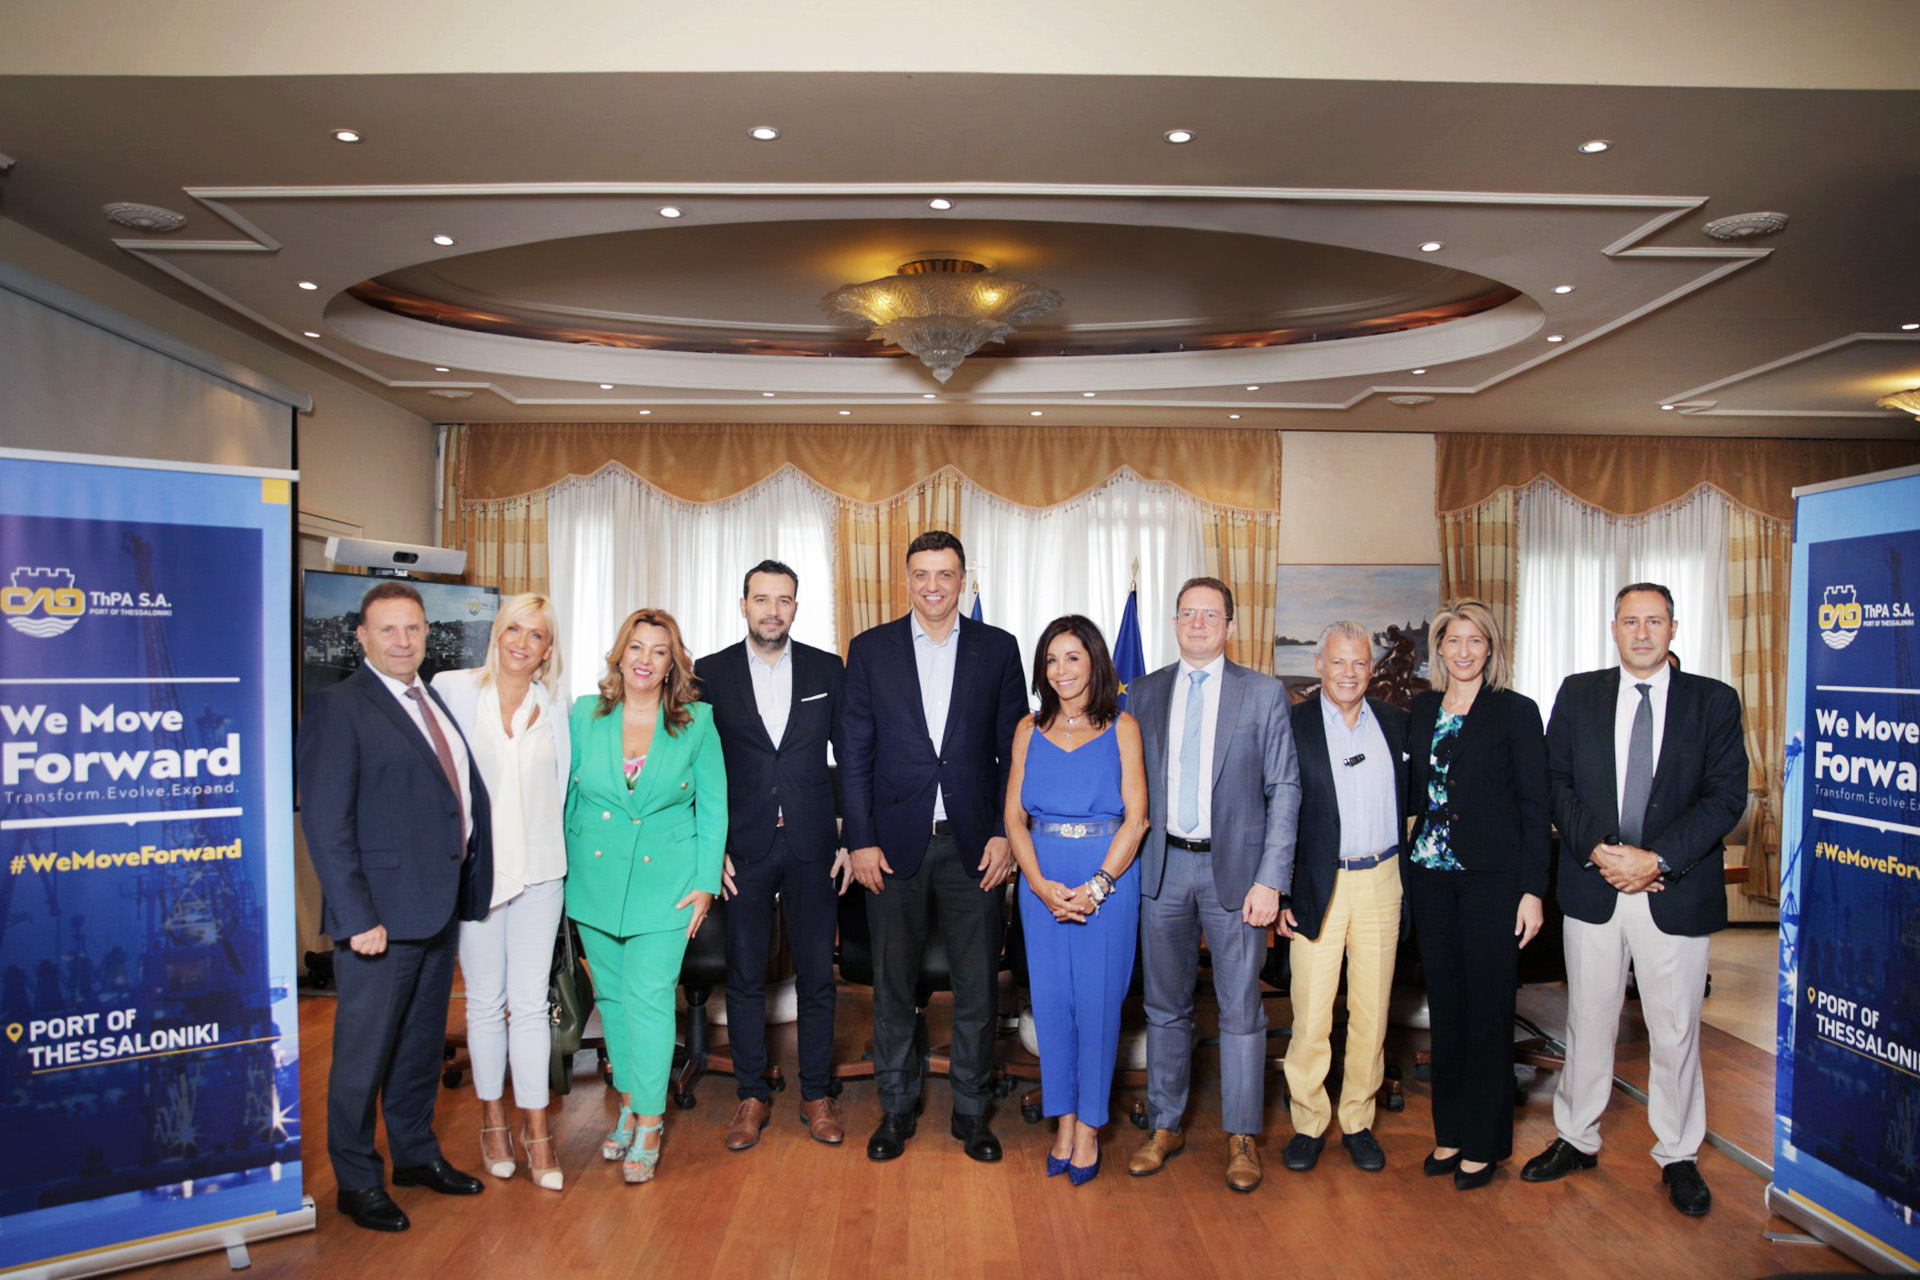 Cruise ship arrivals in Thessaloniki up tenfold compared to 2019